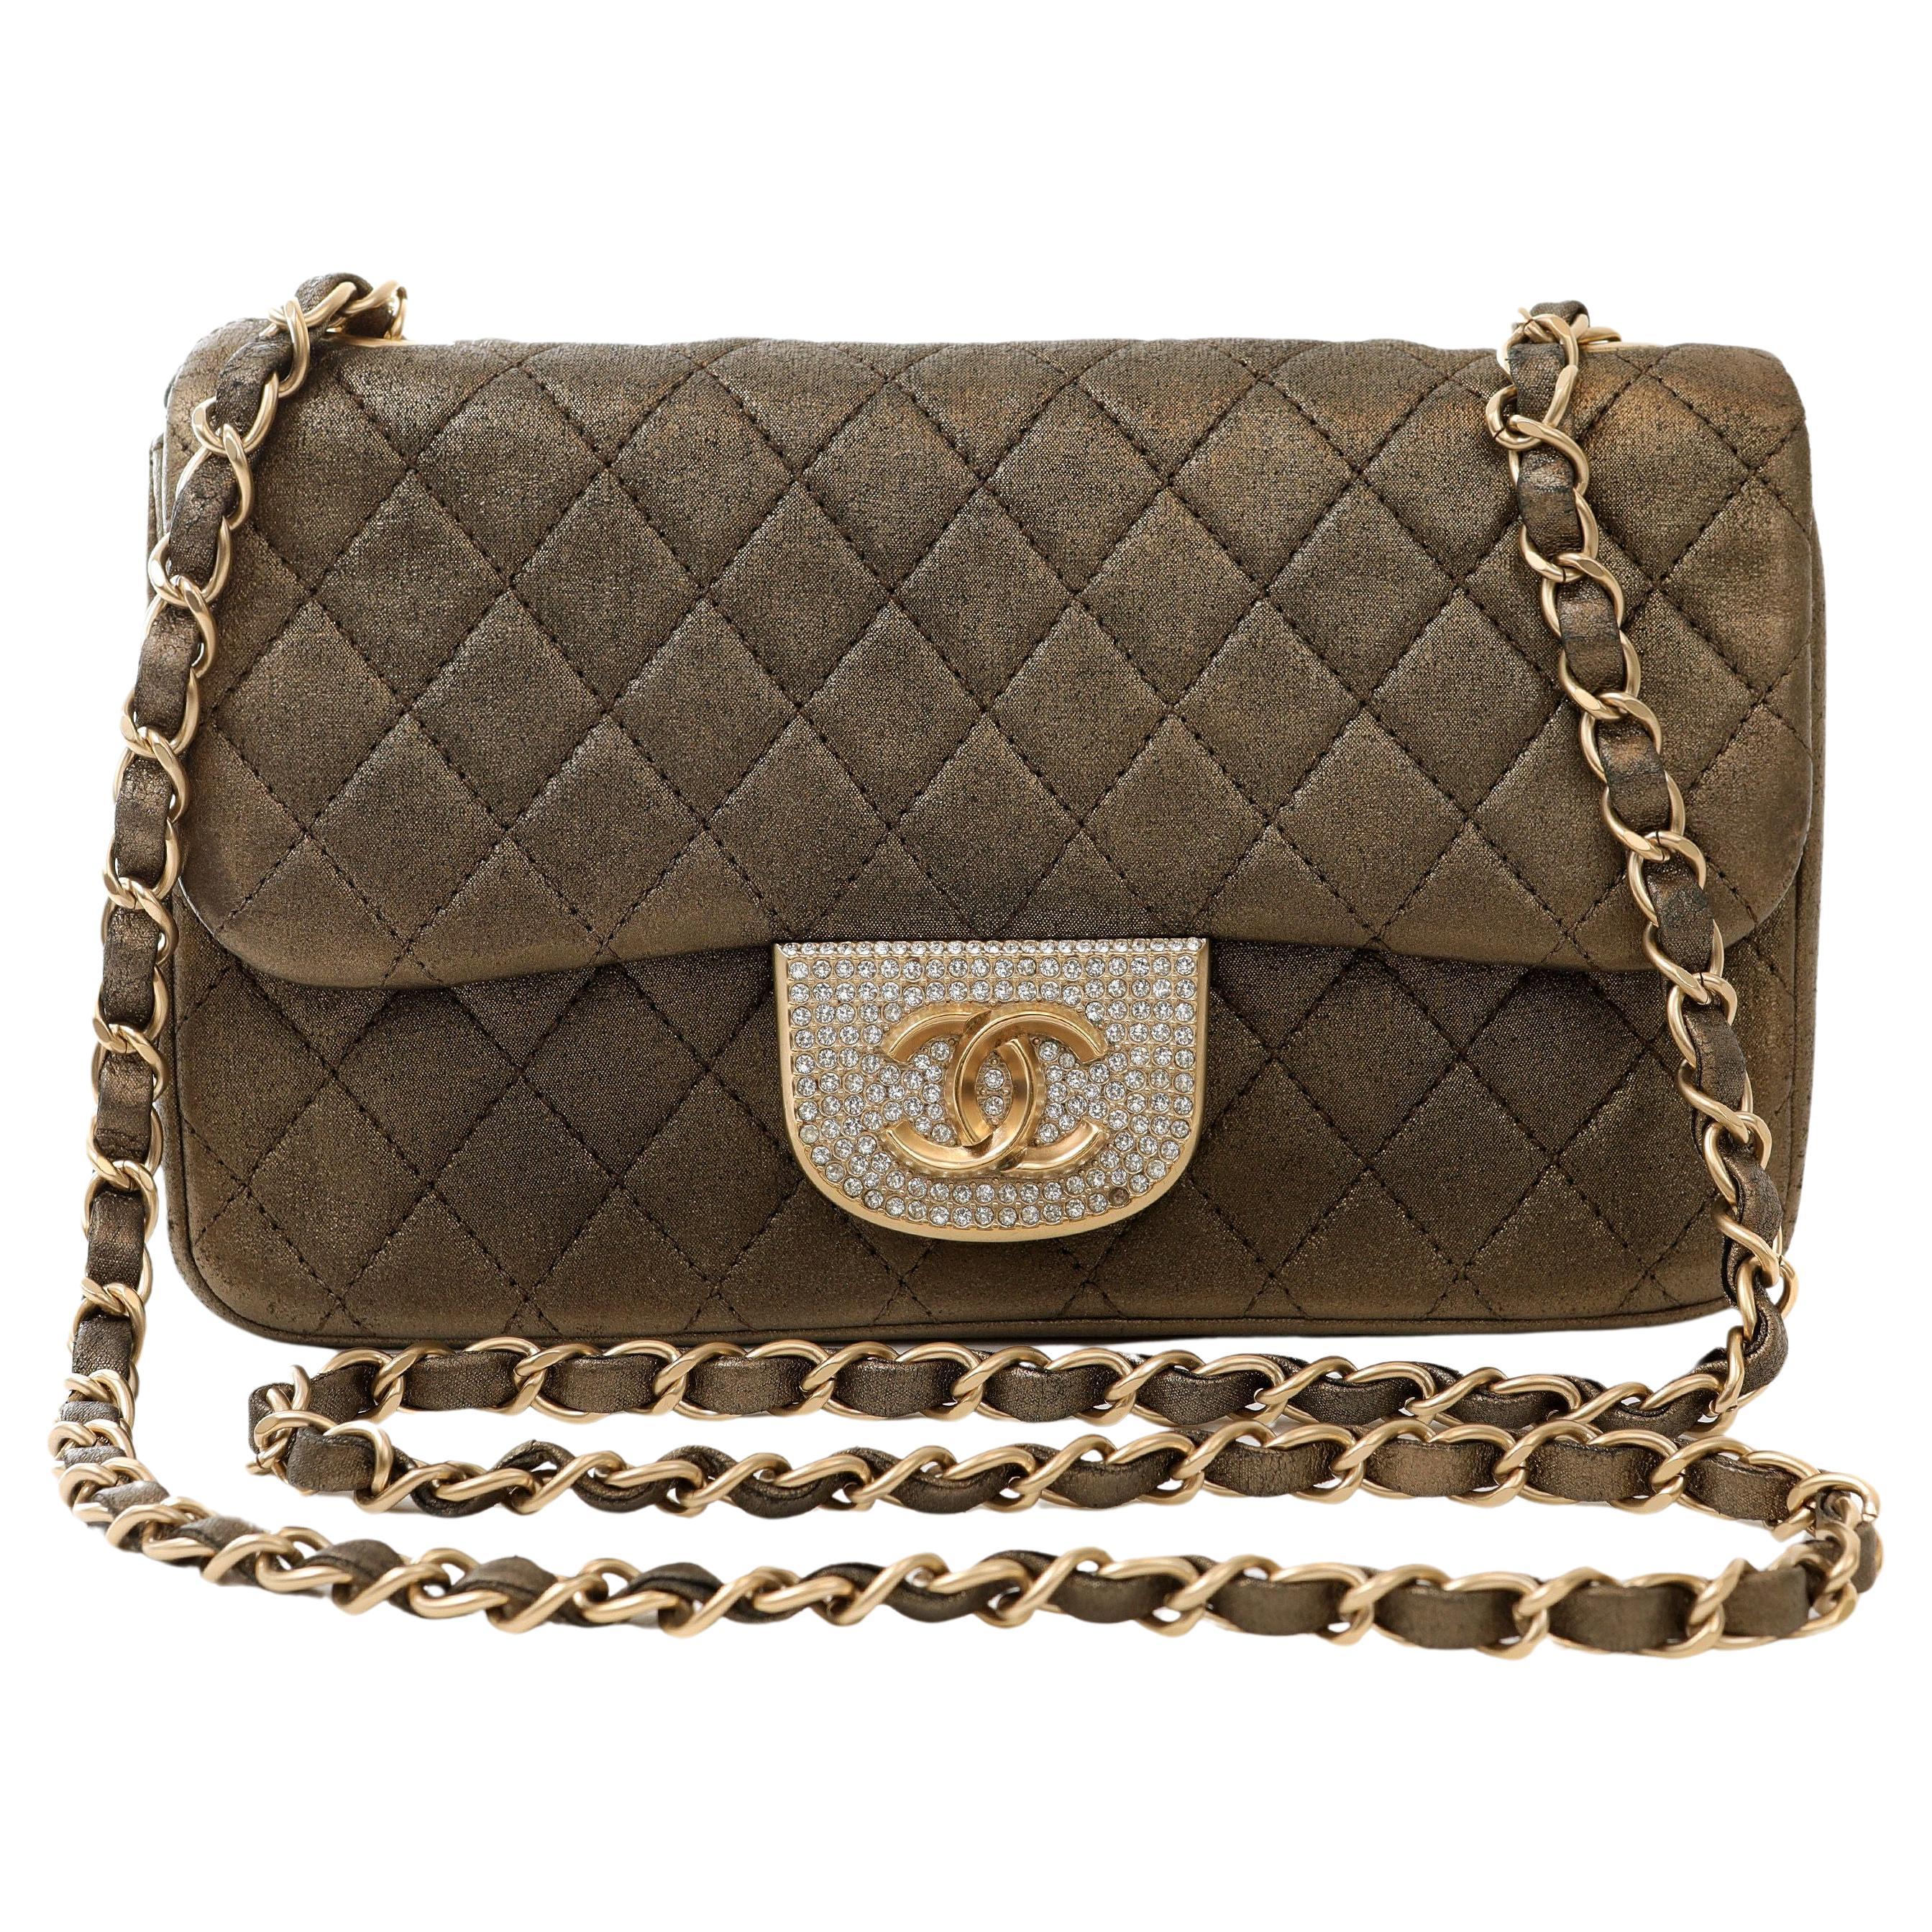 Chanel Metallic Black and Gold Crystal Flap Bag For Sale